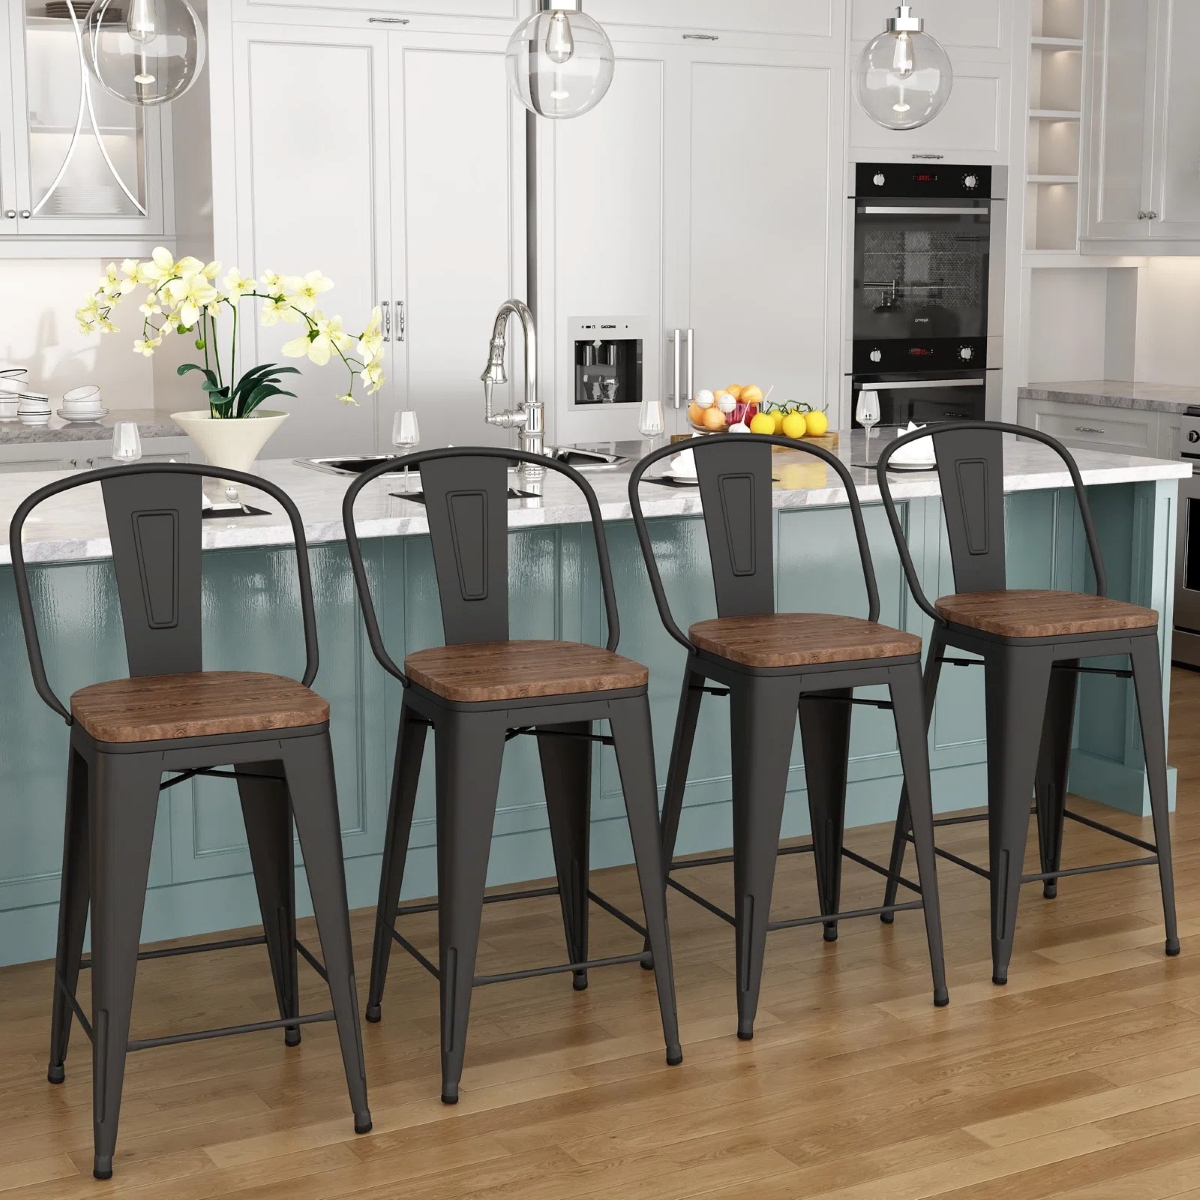 Four counter stools made of metal frames and wooden seats.